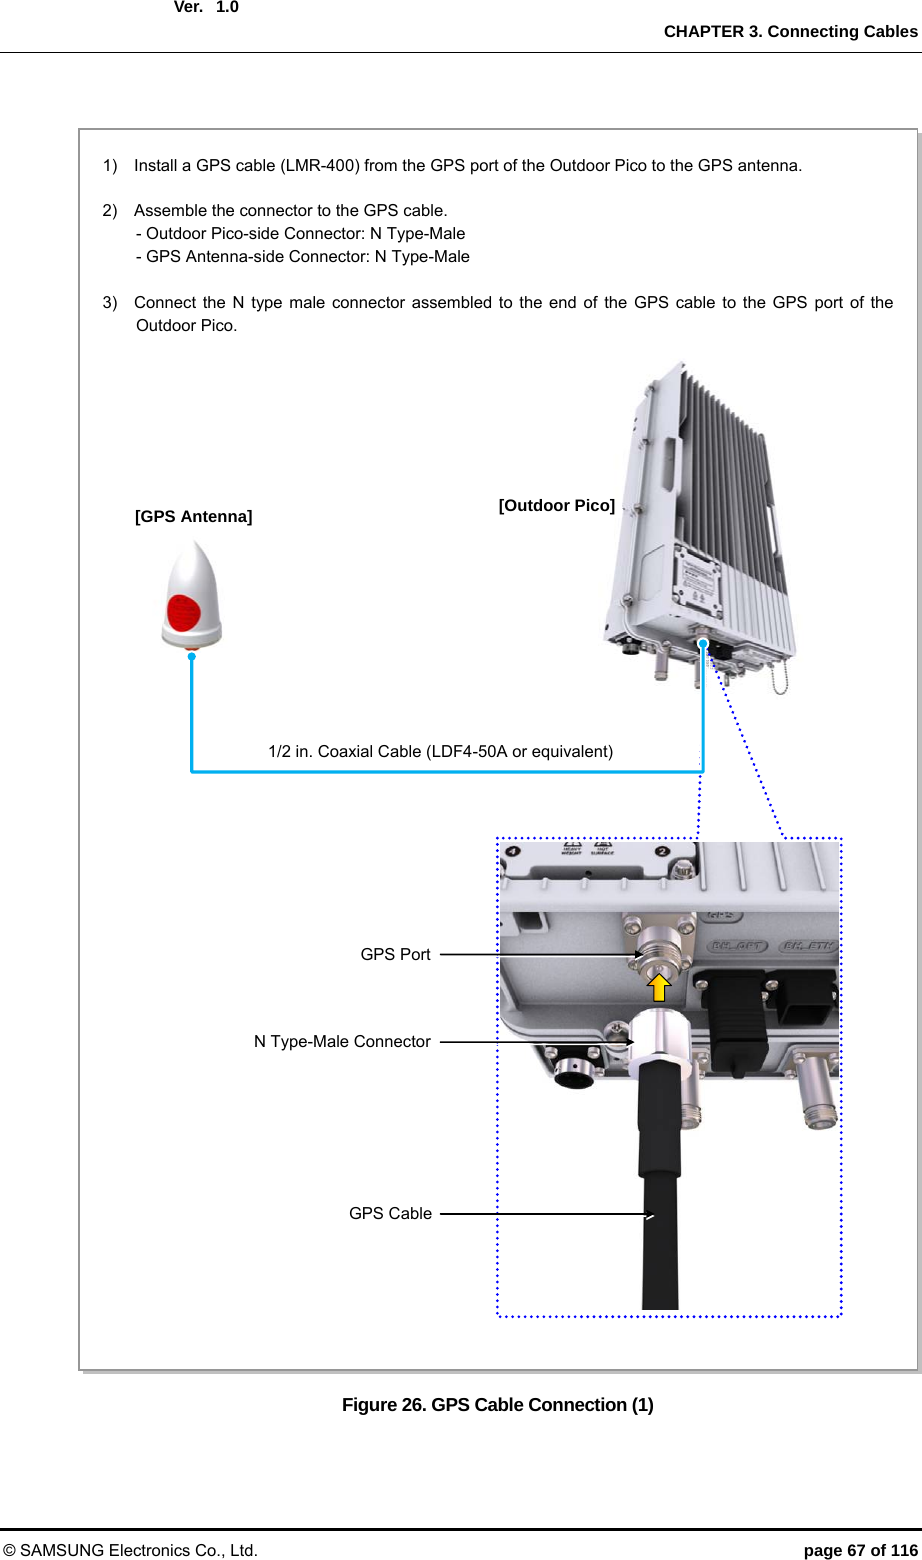  Ver.  CHAPTER 3. Connecting Cables © SAMSUNG Electronics Co., Ltd.  page 67 of 116 1.0  Figure 26. GPS Cable Connection (1) [GPS Antenna]  1)    Install a GPS cable (LMR-400) from the GPS port of the Outdoor Pico to the GPS antenna.  2)    Assemble the connector to the GPS cable. - Outdoor Pico-side Connector: N Type-Male - GPS Antenna-side Connector: N Type-Male  3)   Connect the N type male connector assembled to the end of the GPS cable to the GPS port of the Outdoor Pico. 1/2 in. Coaxial Cable (LDF4-50A or equivalent)  [Outdoor Pico] N Type-Male ConnectorGPS CableGPS Port